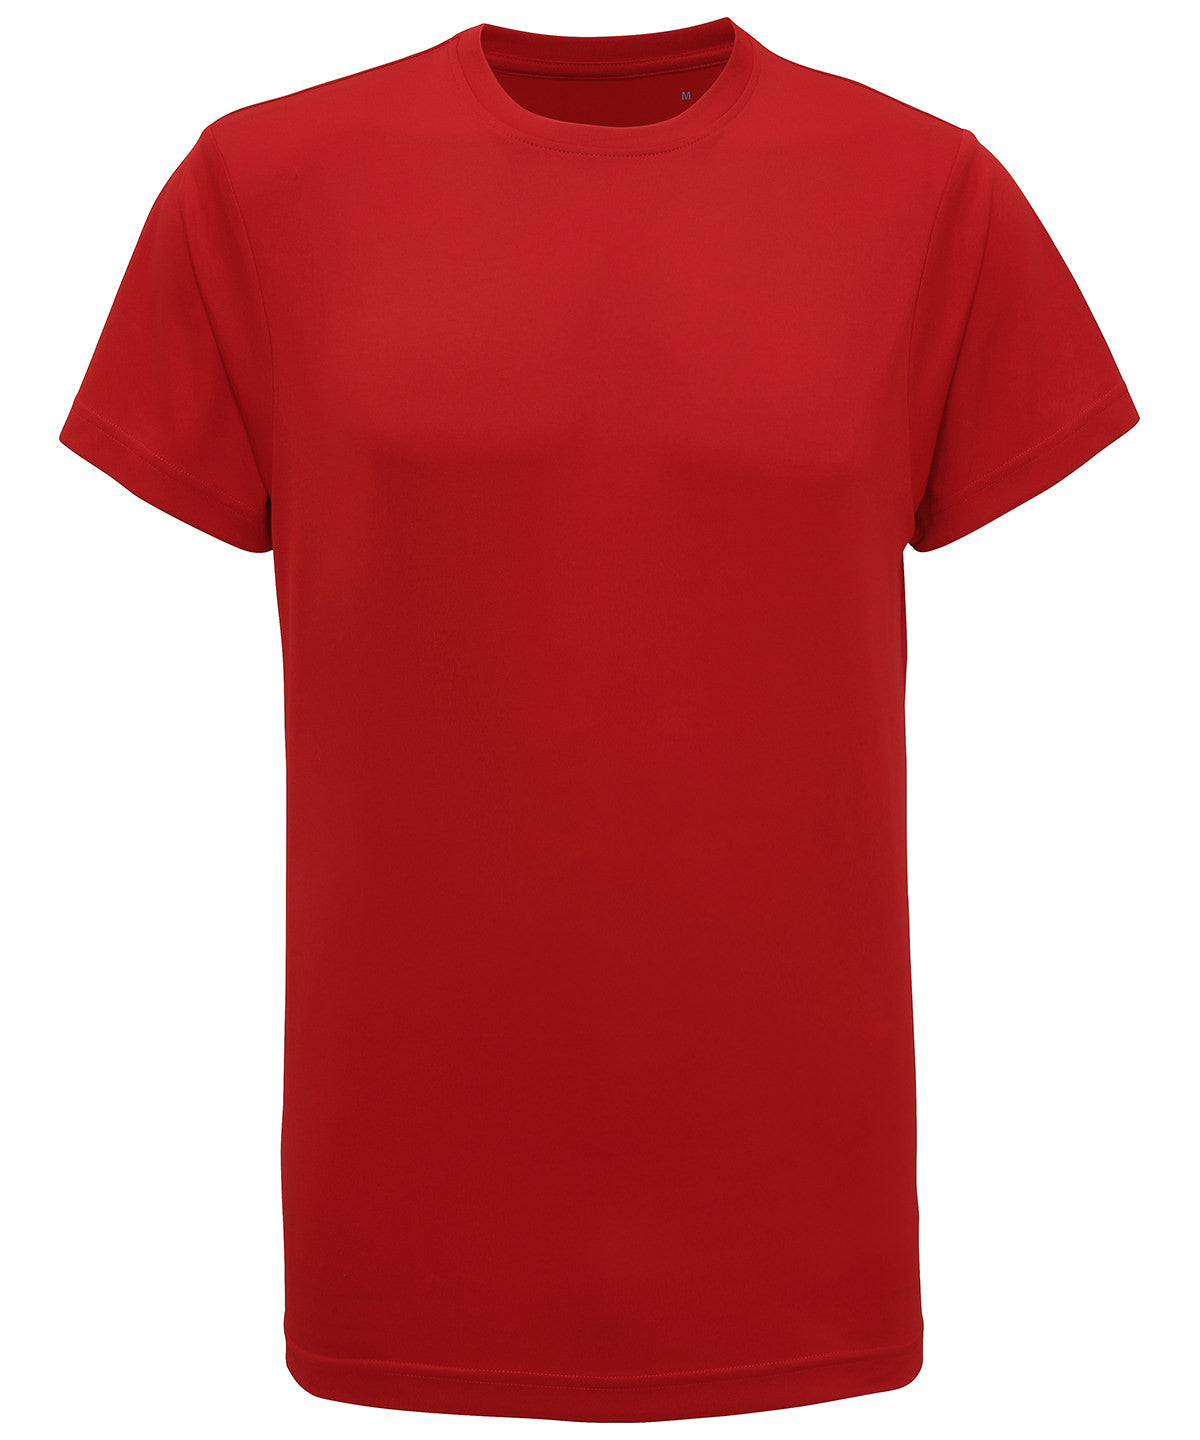 Fire Red - TriDri® performance t-shirt T-Shirts TriDri® Activewear & Performance, Athleisurewear, Back to the Gym, Exclusives, Gymwear, Must Haves, New Colours For 2022, Outdoor Sports, Plus Sizes, Rebrandable, Sports & Leisure, T-Shirts & Vests, Team Sportswear, UPF Protection Schoolwear Centres